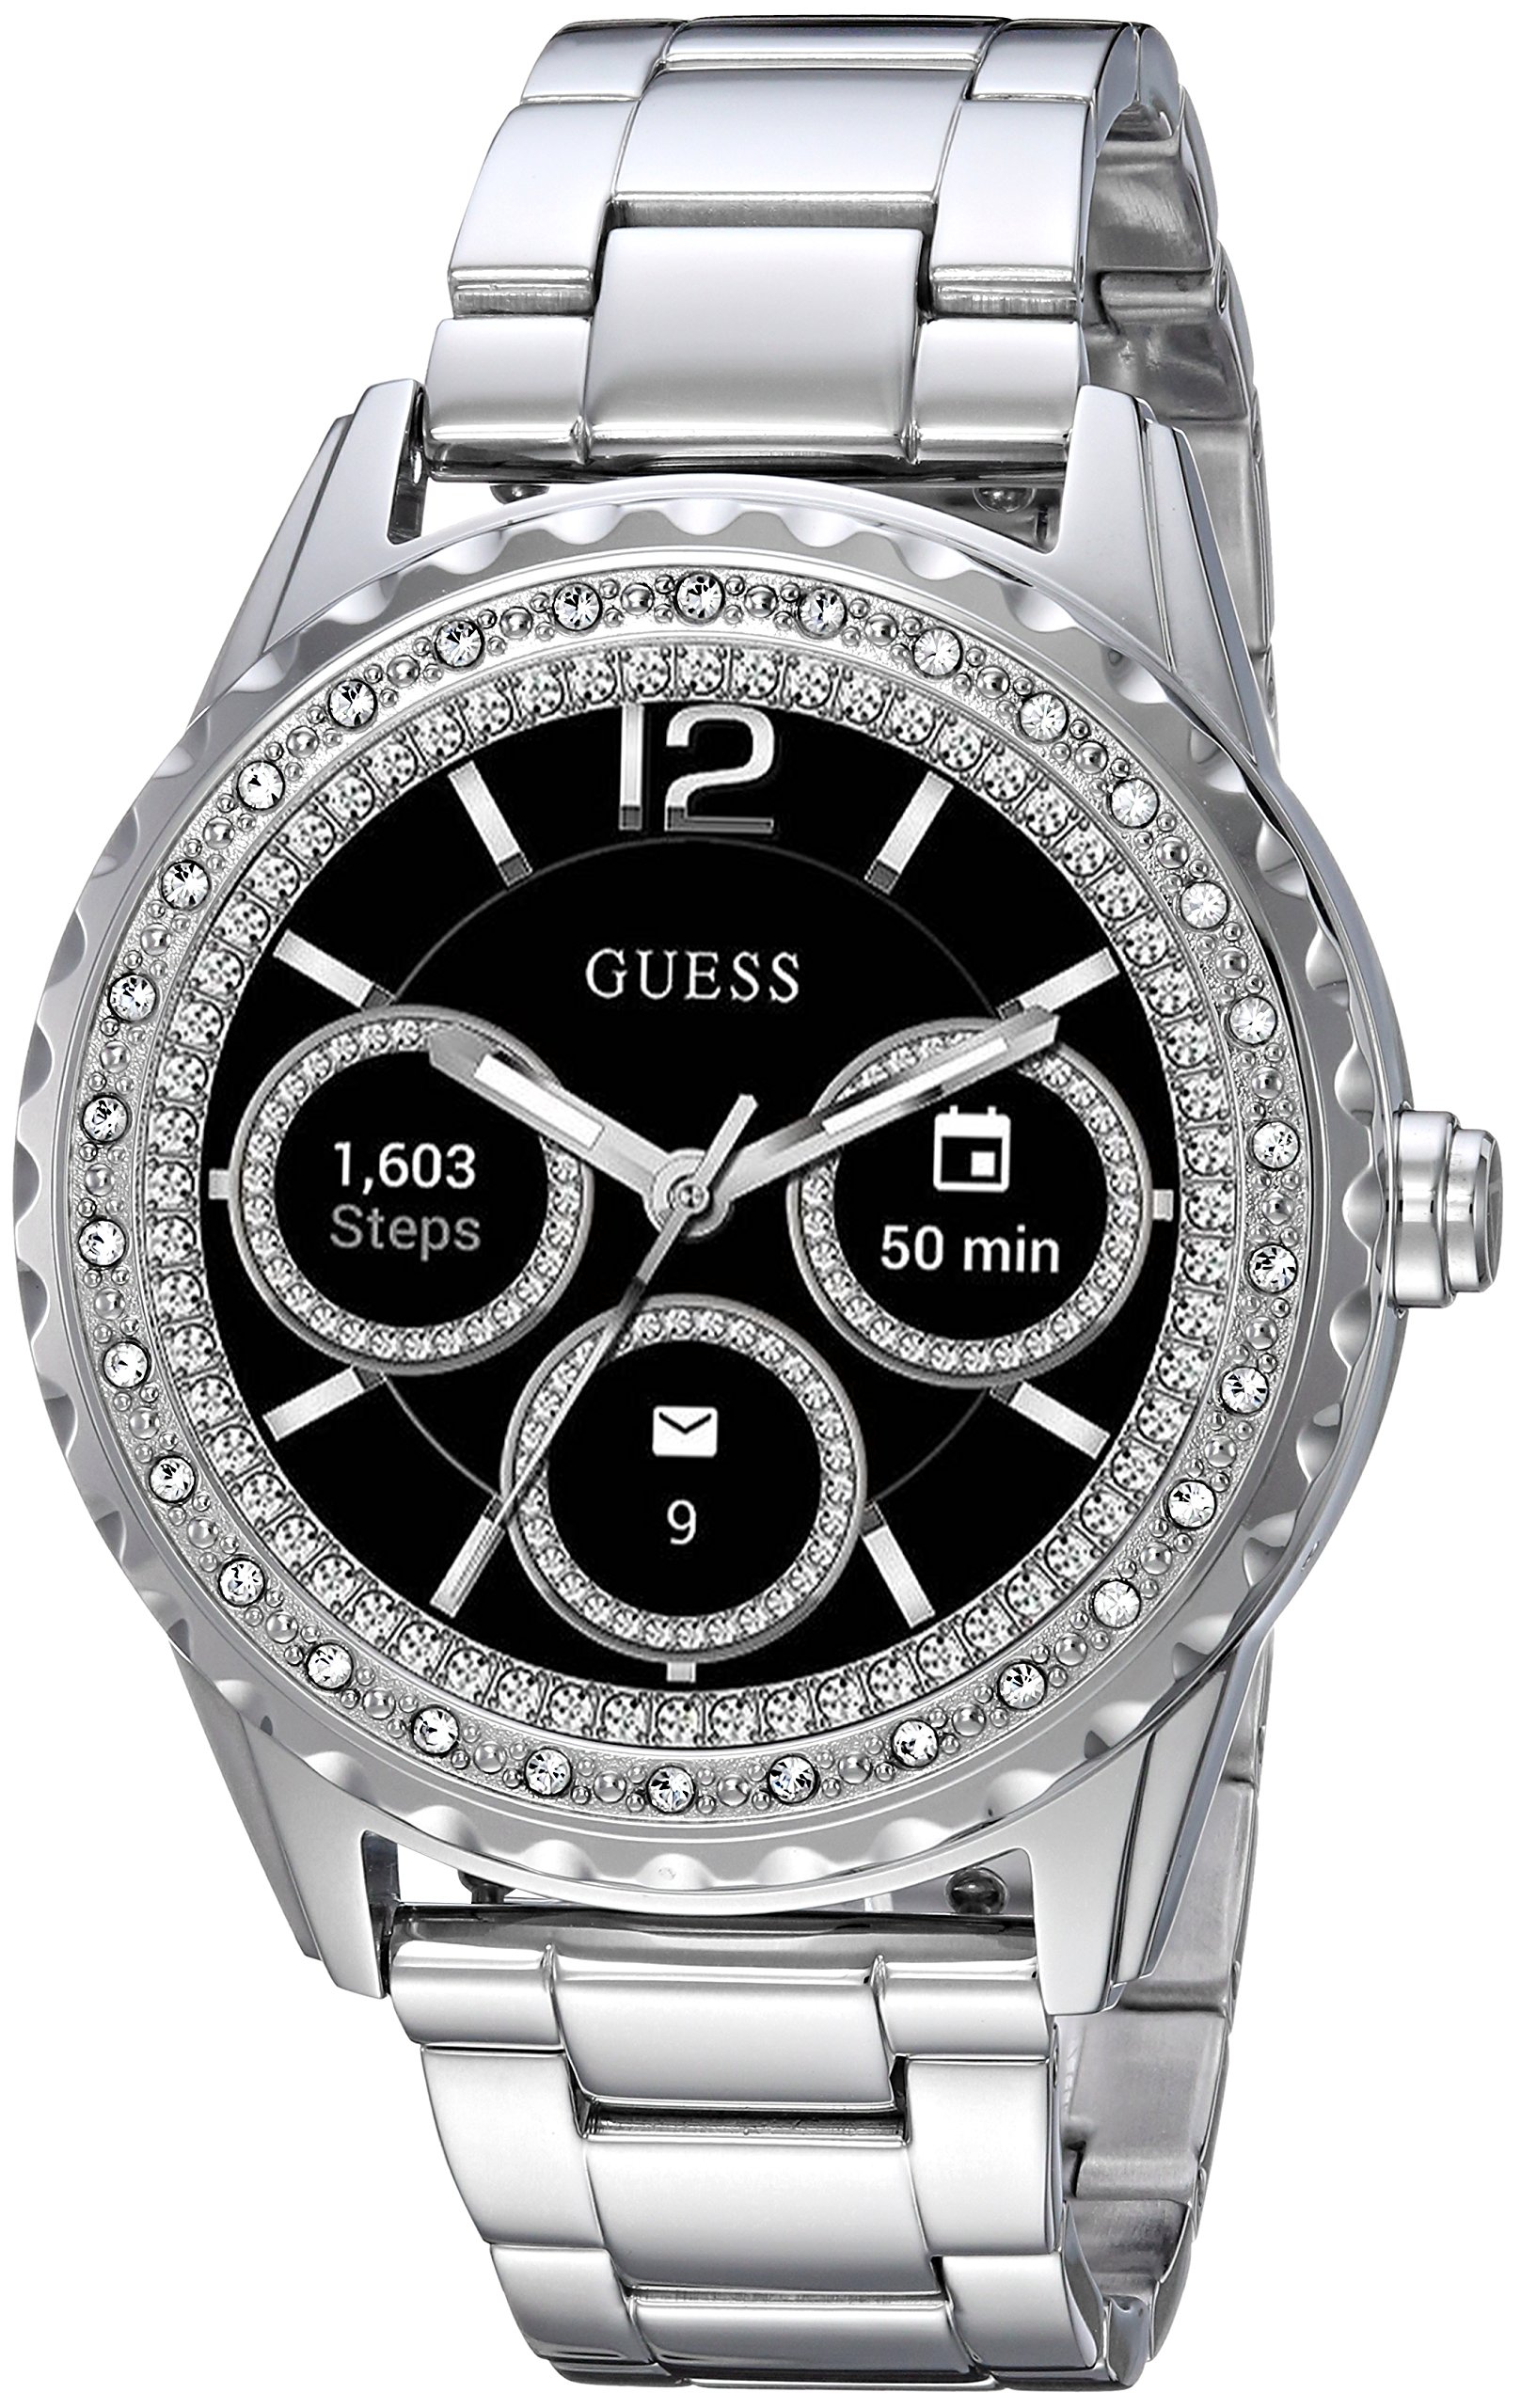 GUESS 42mm Stainless Steel Android Wear Touch Screen Smartwatch